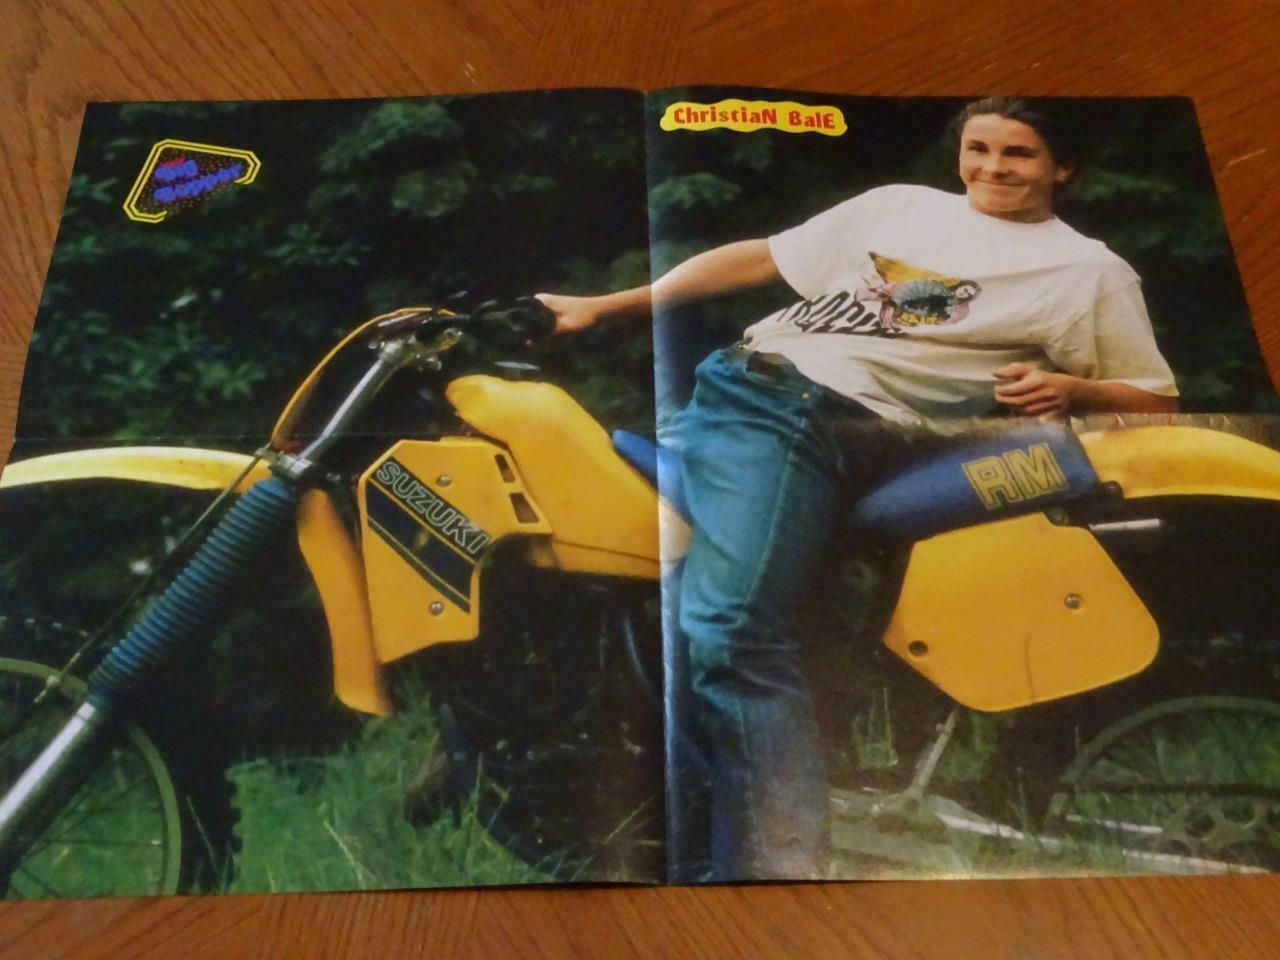 Primary image for Christian Bale Color Me Badd teen magazine poster clipping Motorcycle Big Bopper